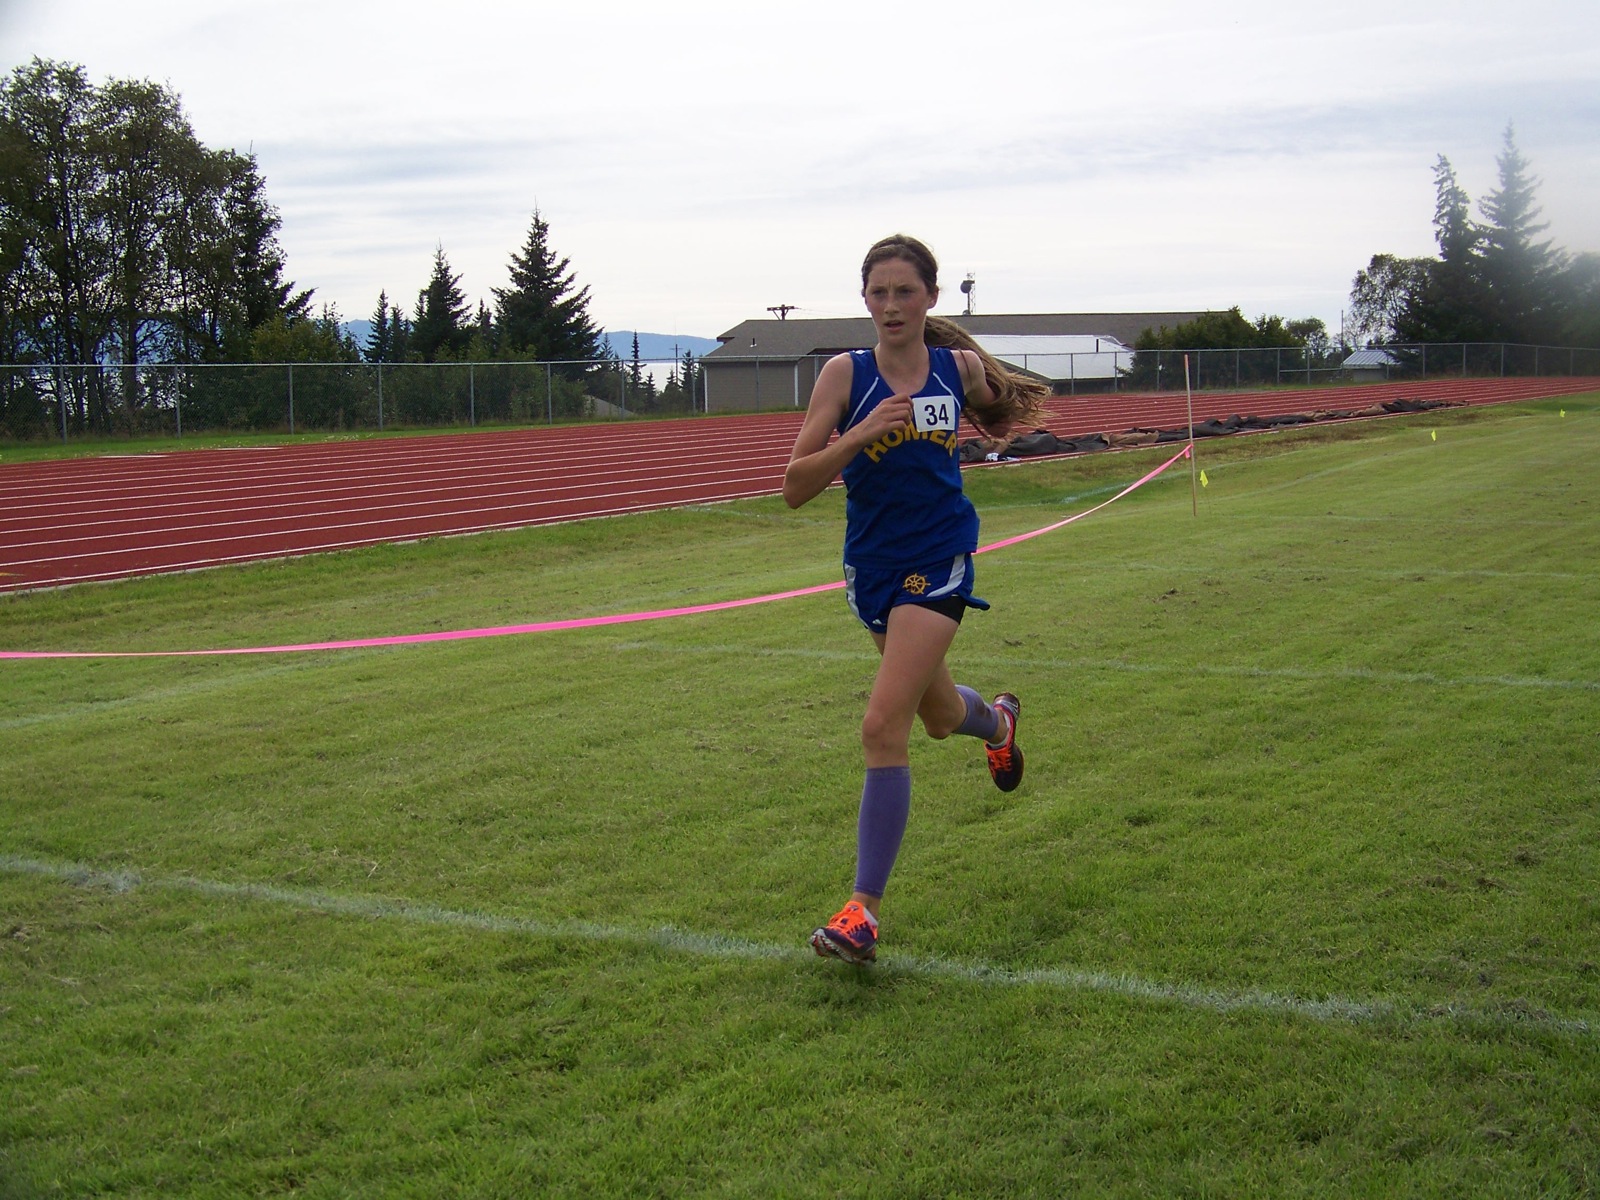 Homer’s Megan Pitzman crosses the finish line in 20:35, a third-place finish.-Photo by McKibben Jackinsky, Homer News